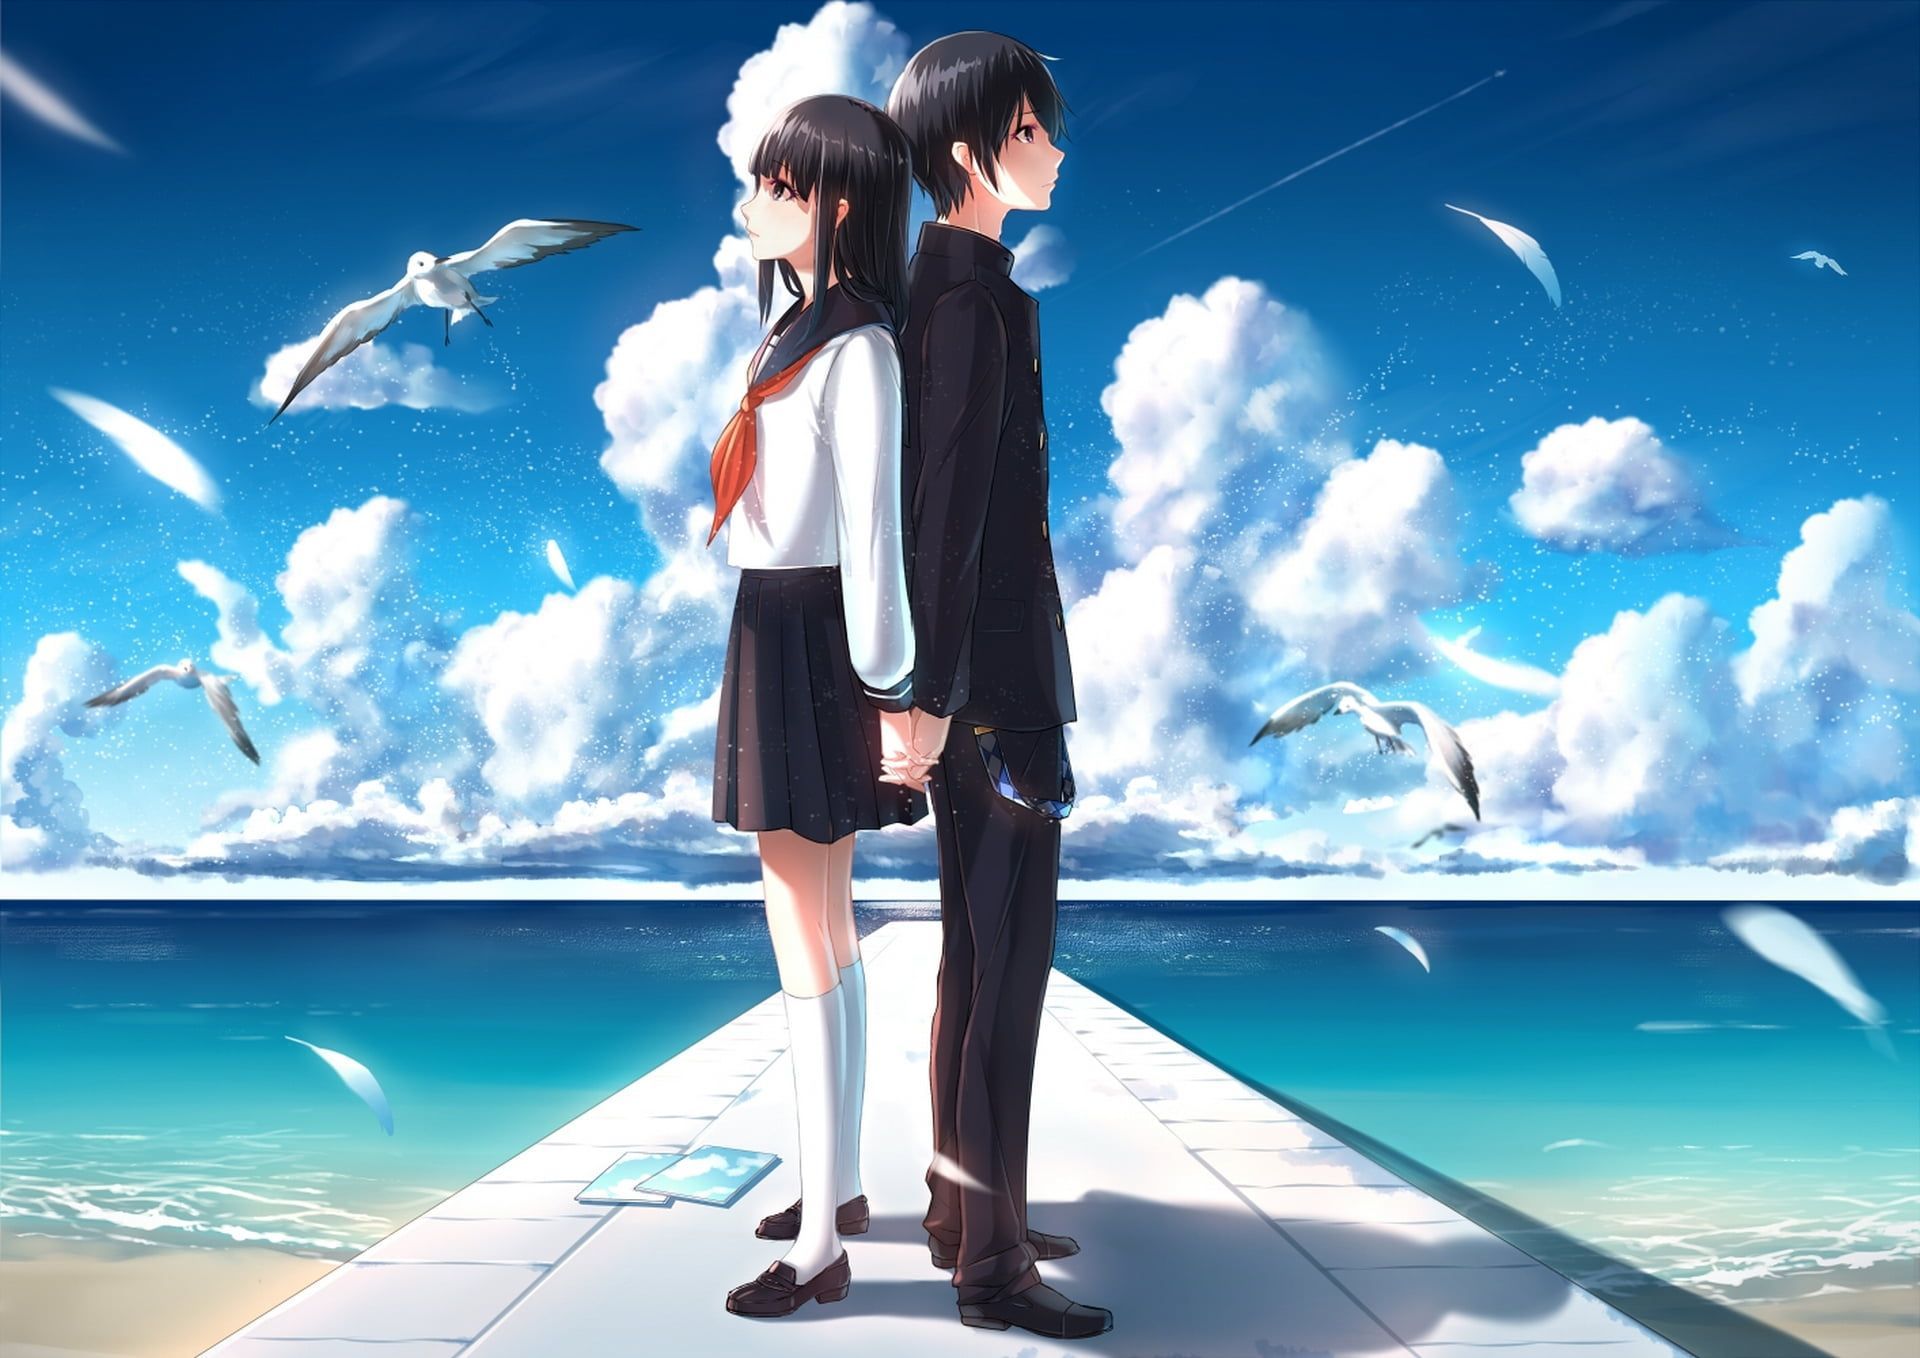 Two Boy And Girl Anime Characters On Dock Illustration